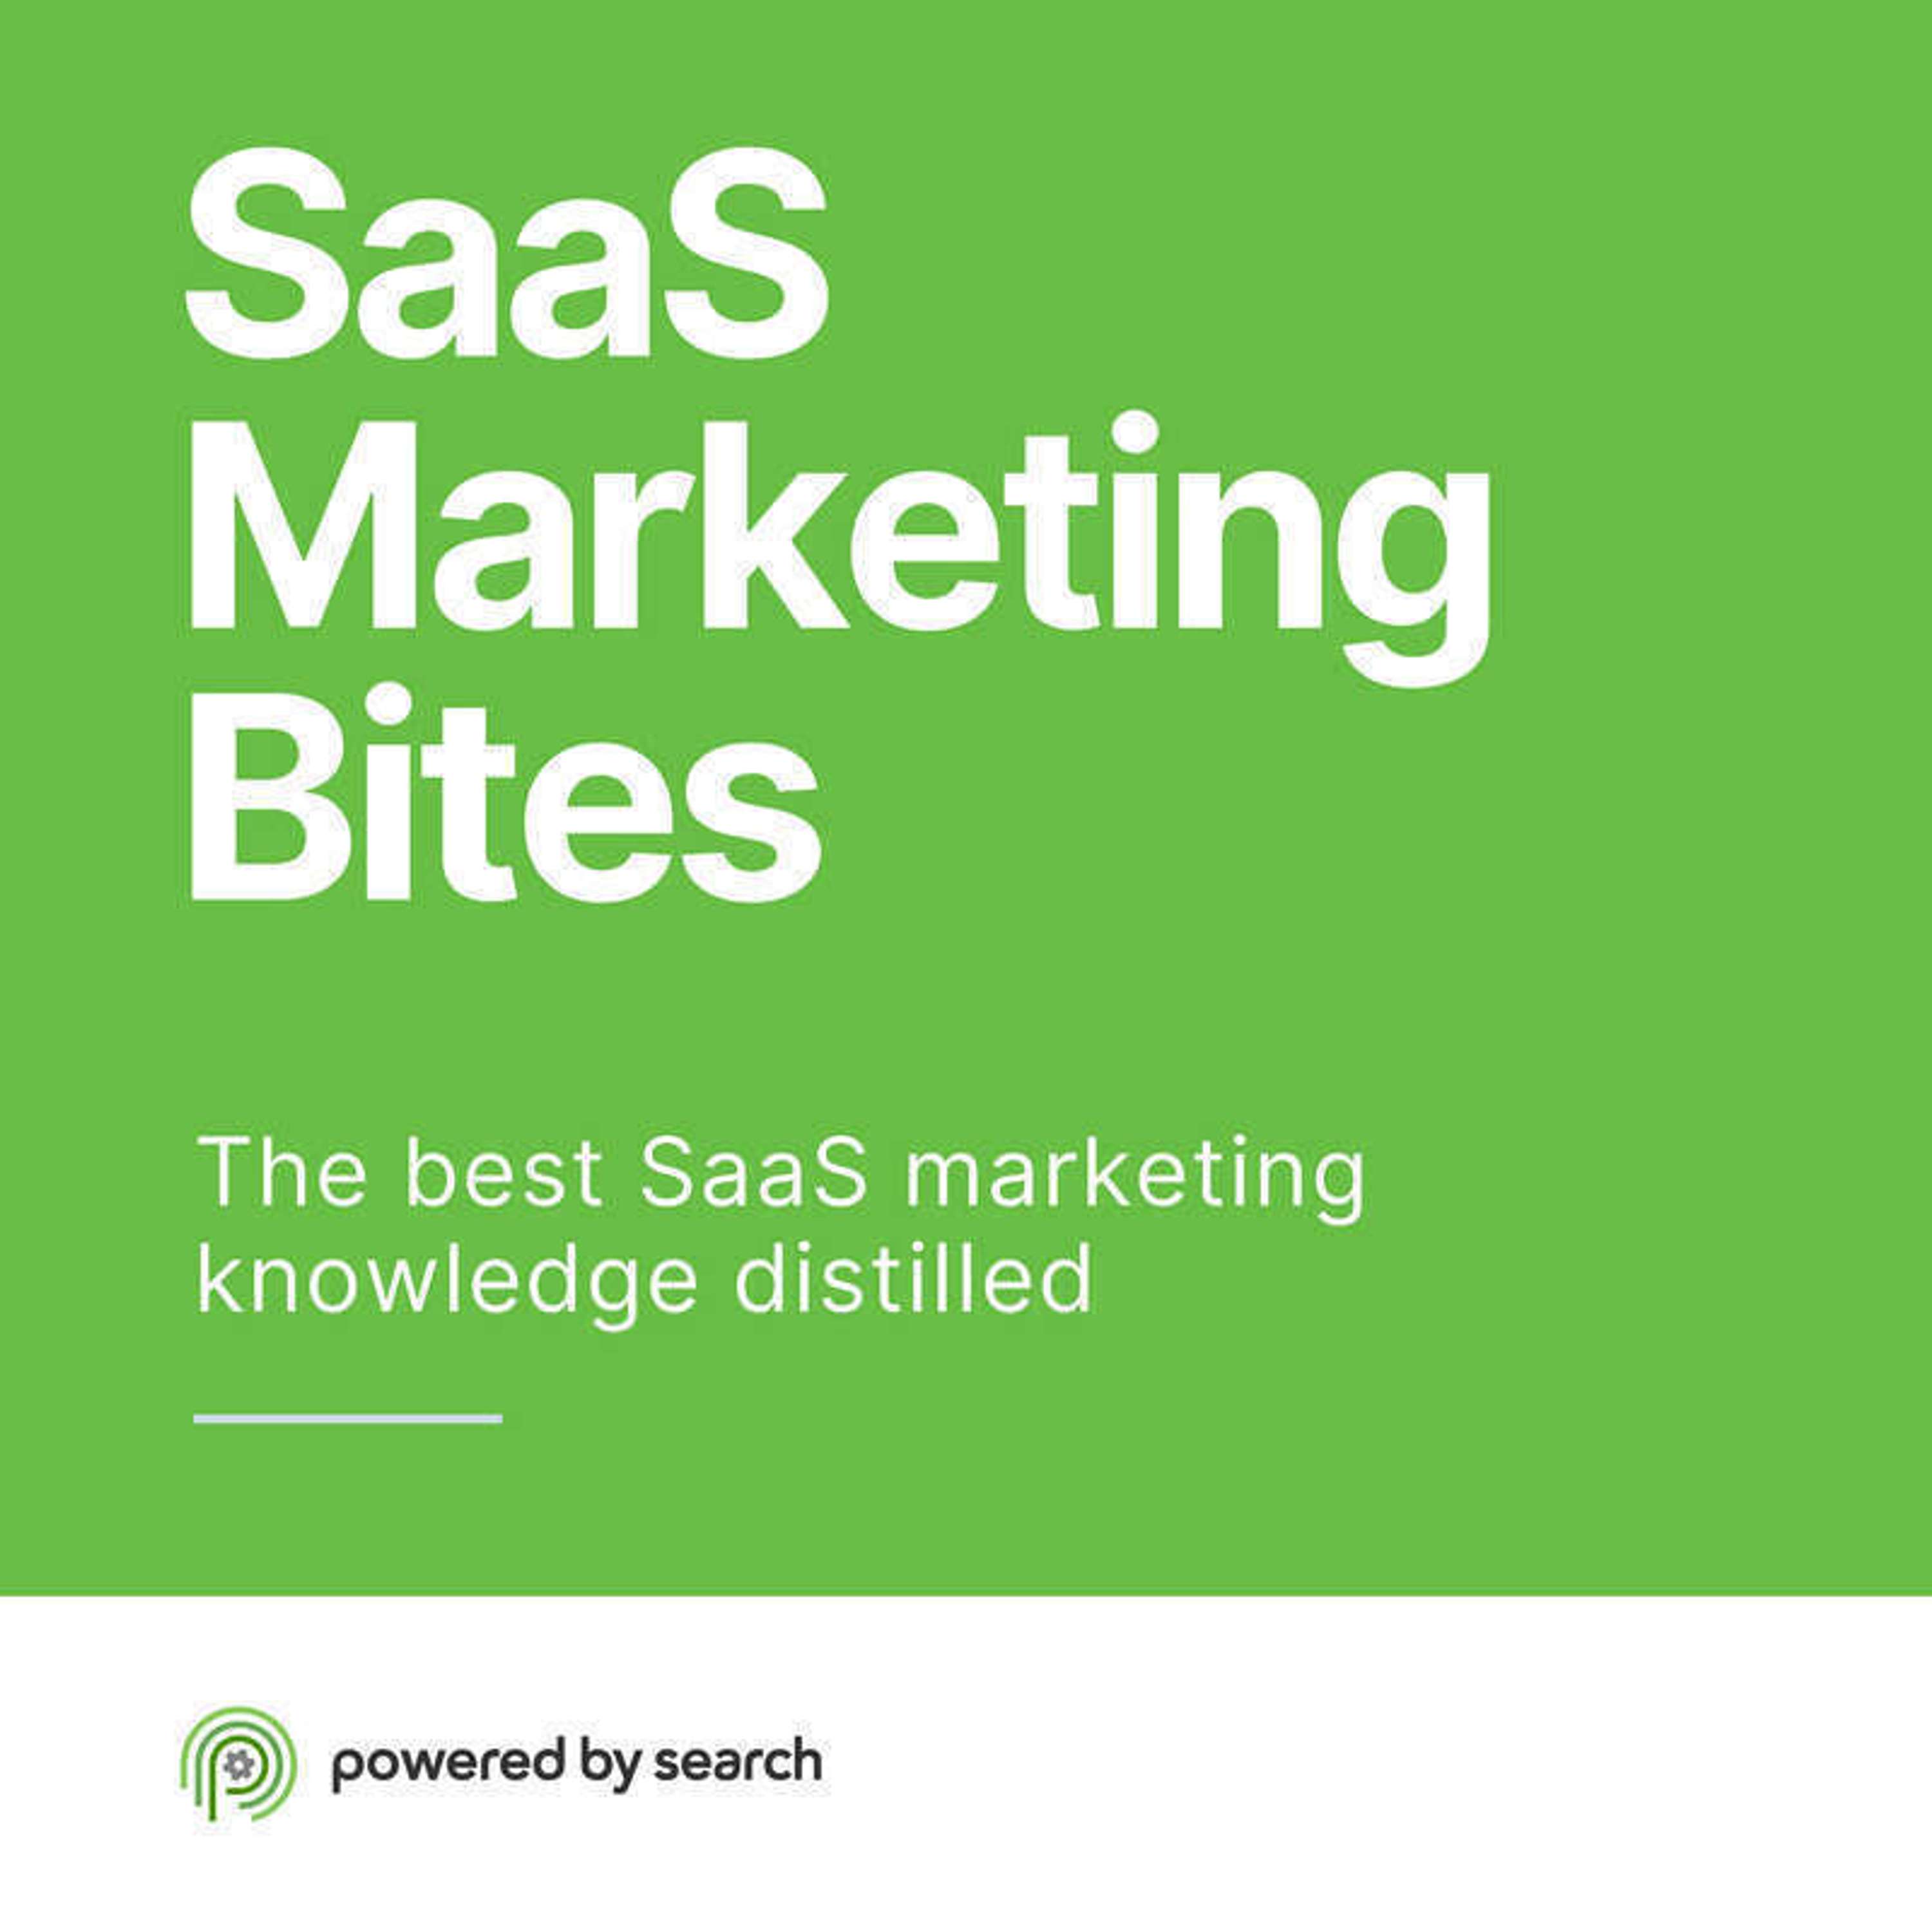 [Replay] How to Diagnose a Sudden Drop in Leads in B2B SaaS